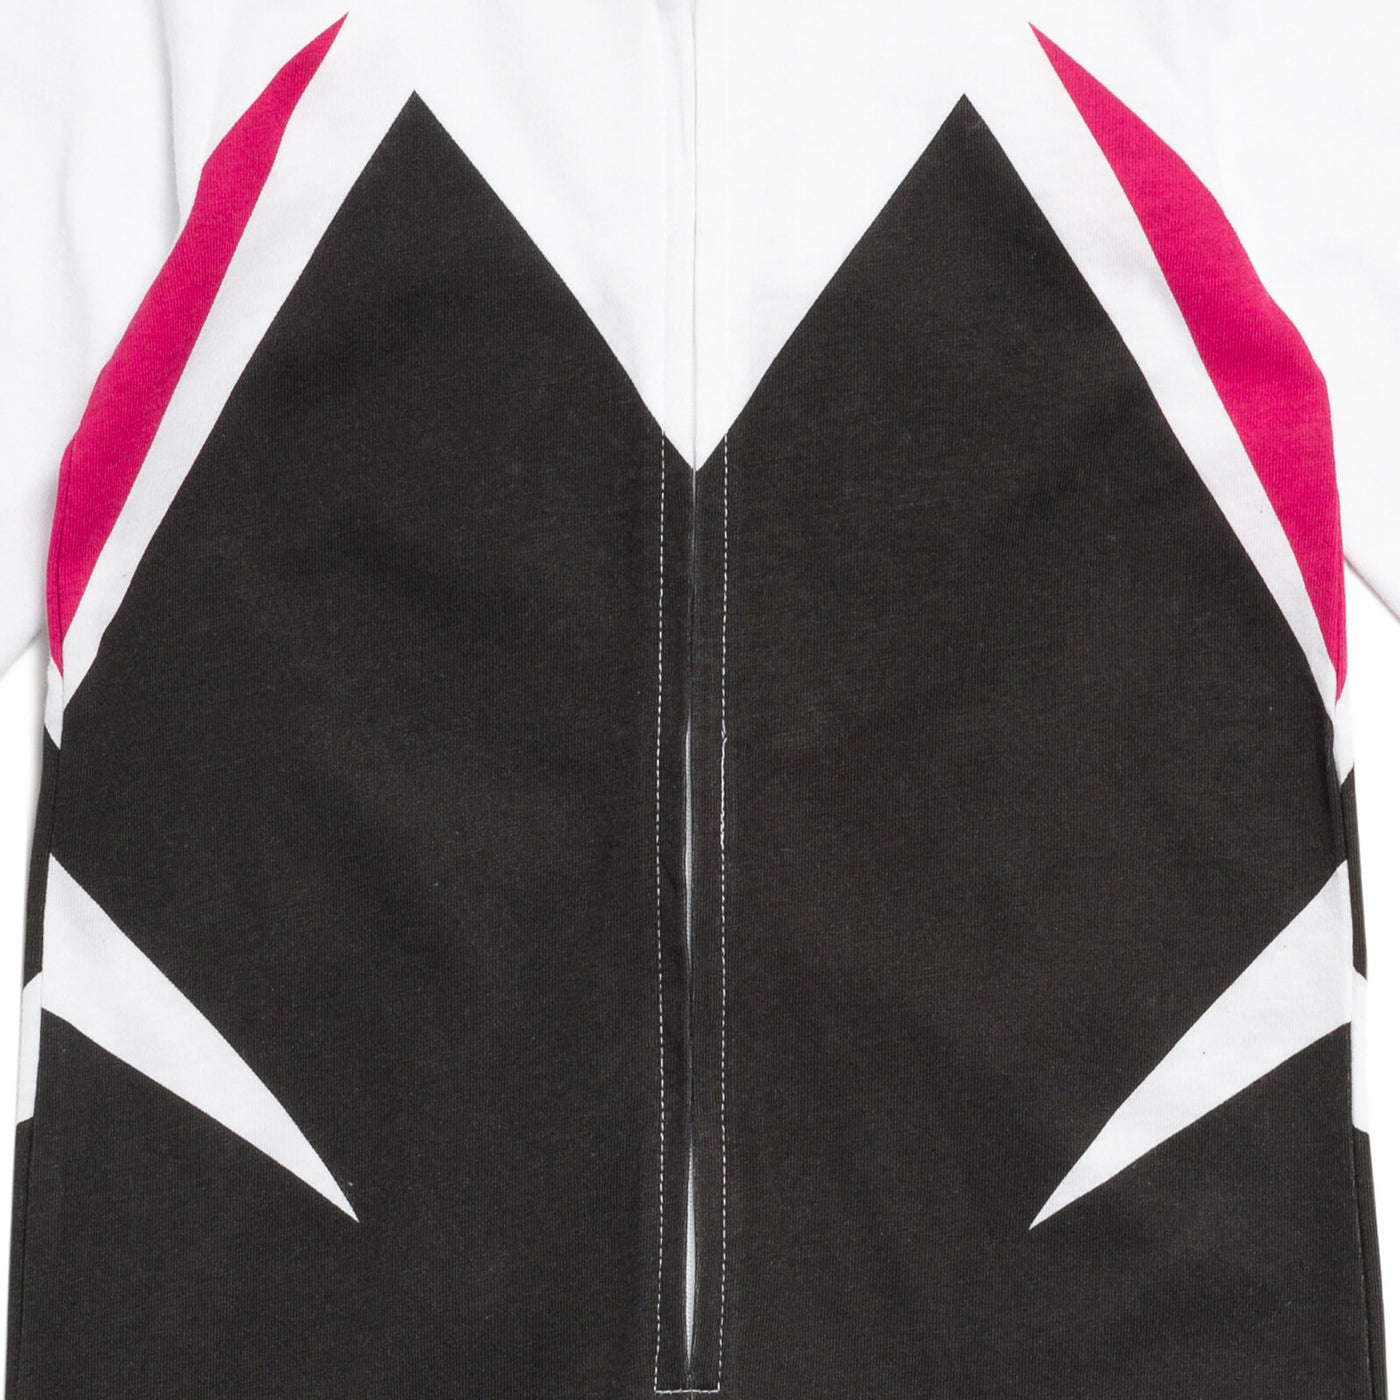 Marvel Gwen Spiderverse Zip Up Coverall